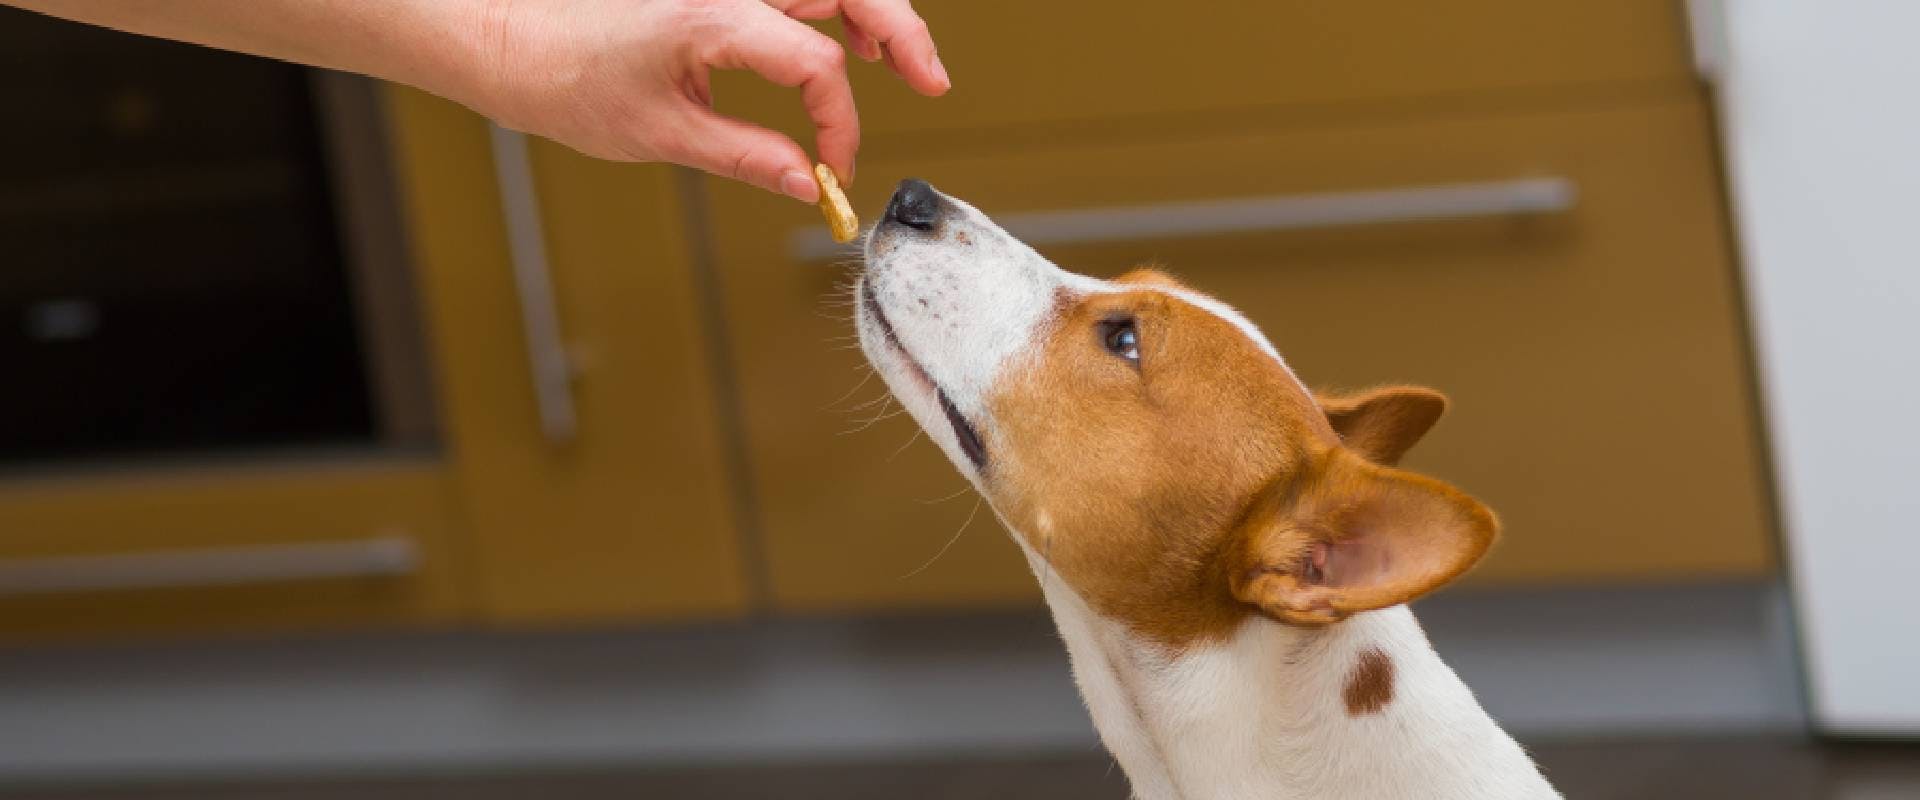 Dog taking a biscuit from person's fingers